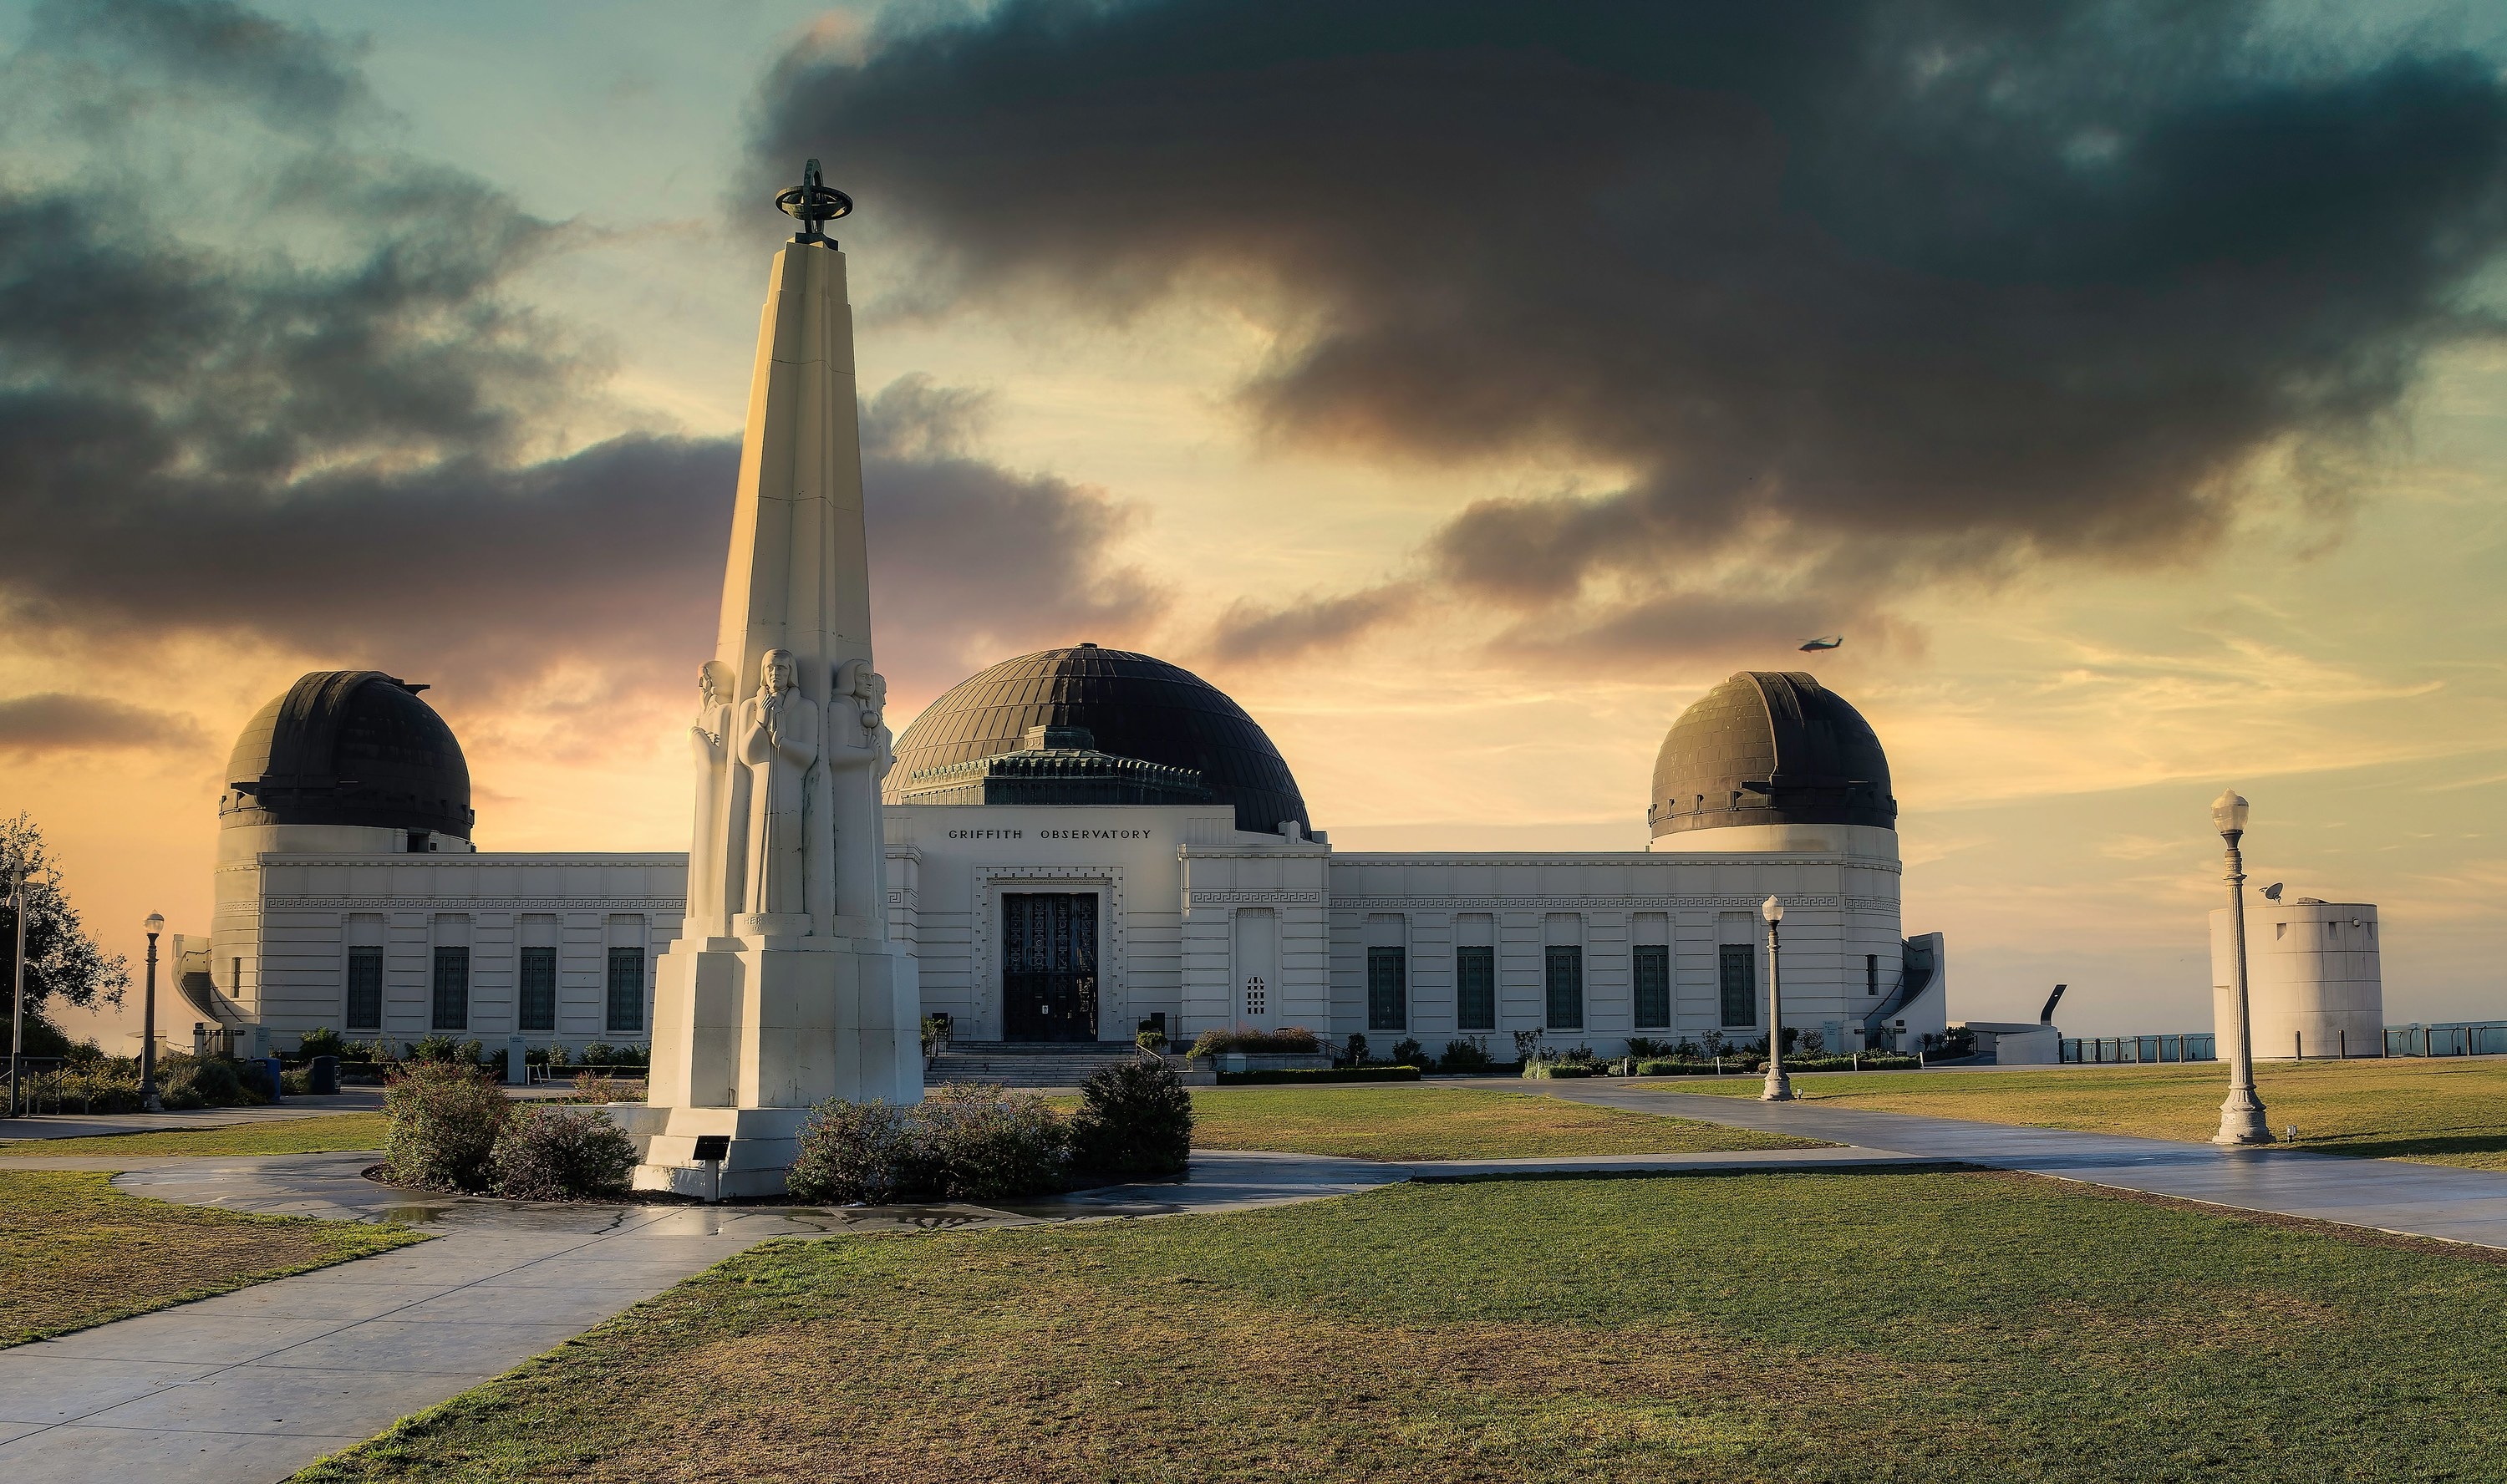 The Griffith Observatory in Los Angeles, California, USA